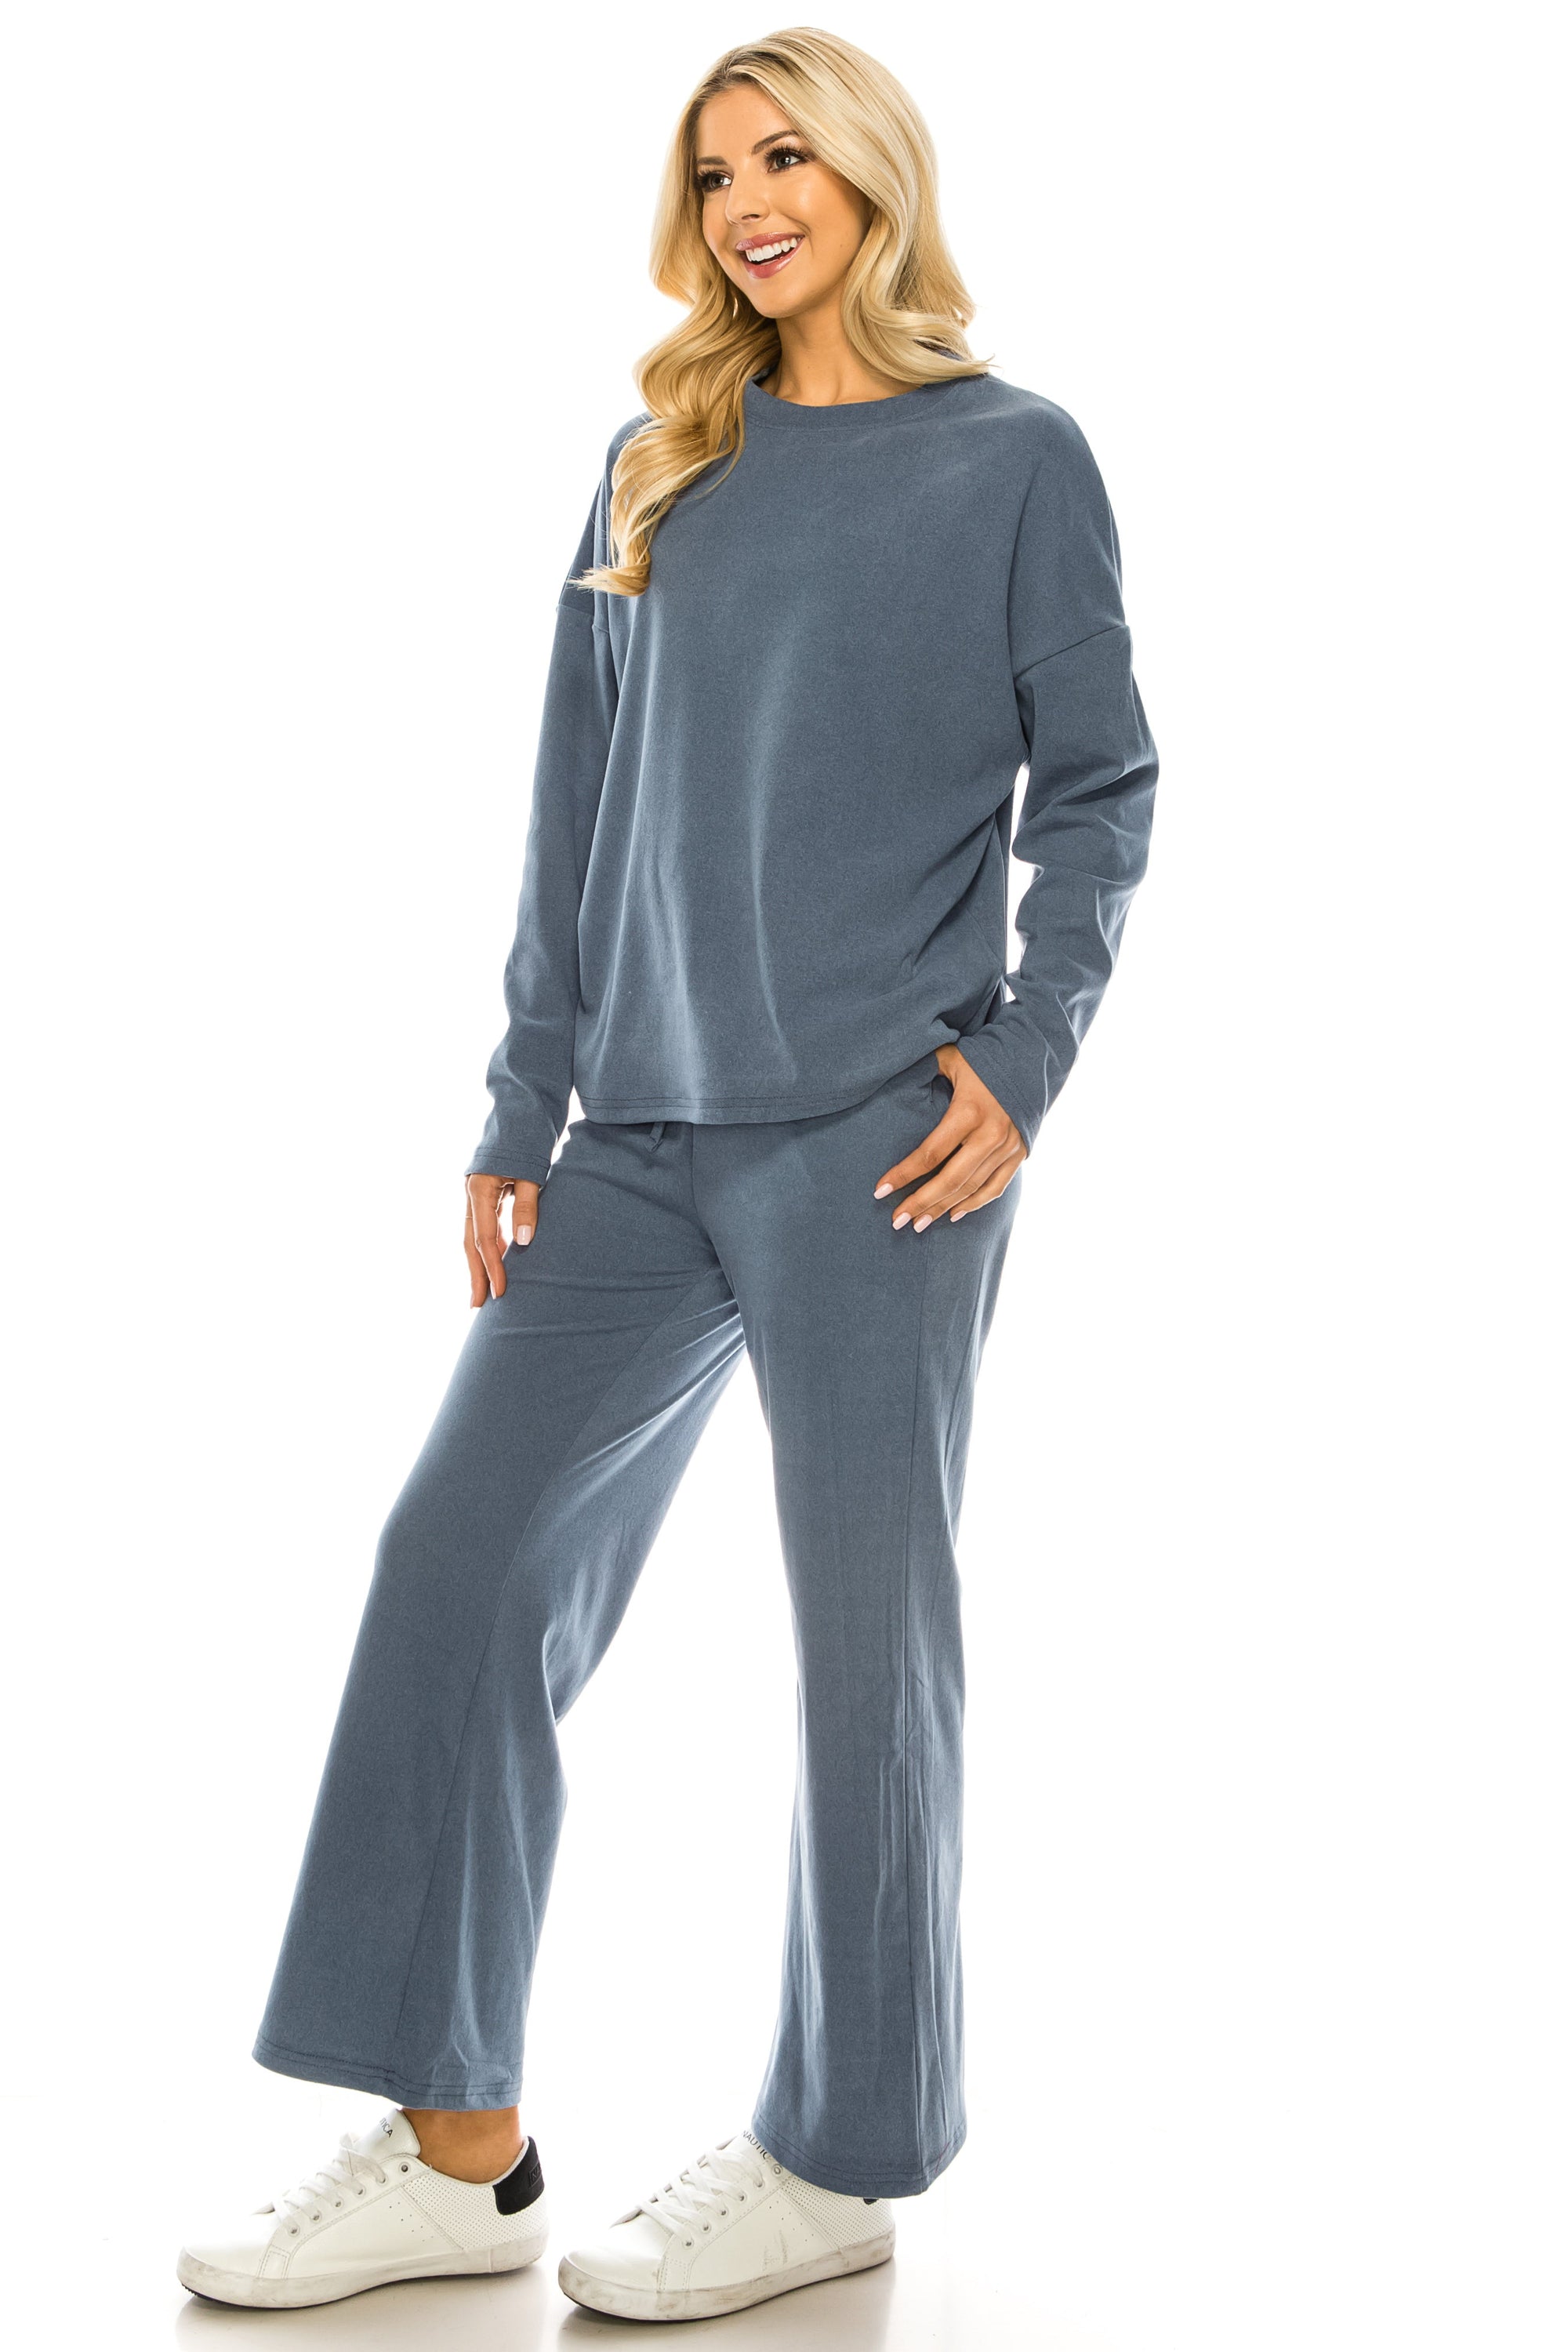 Haute Edition Women's Knit Lounge Set with Sweatshirt and Flared Pant